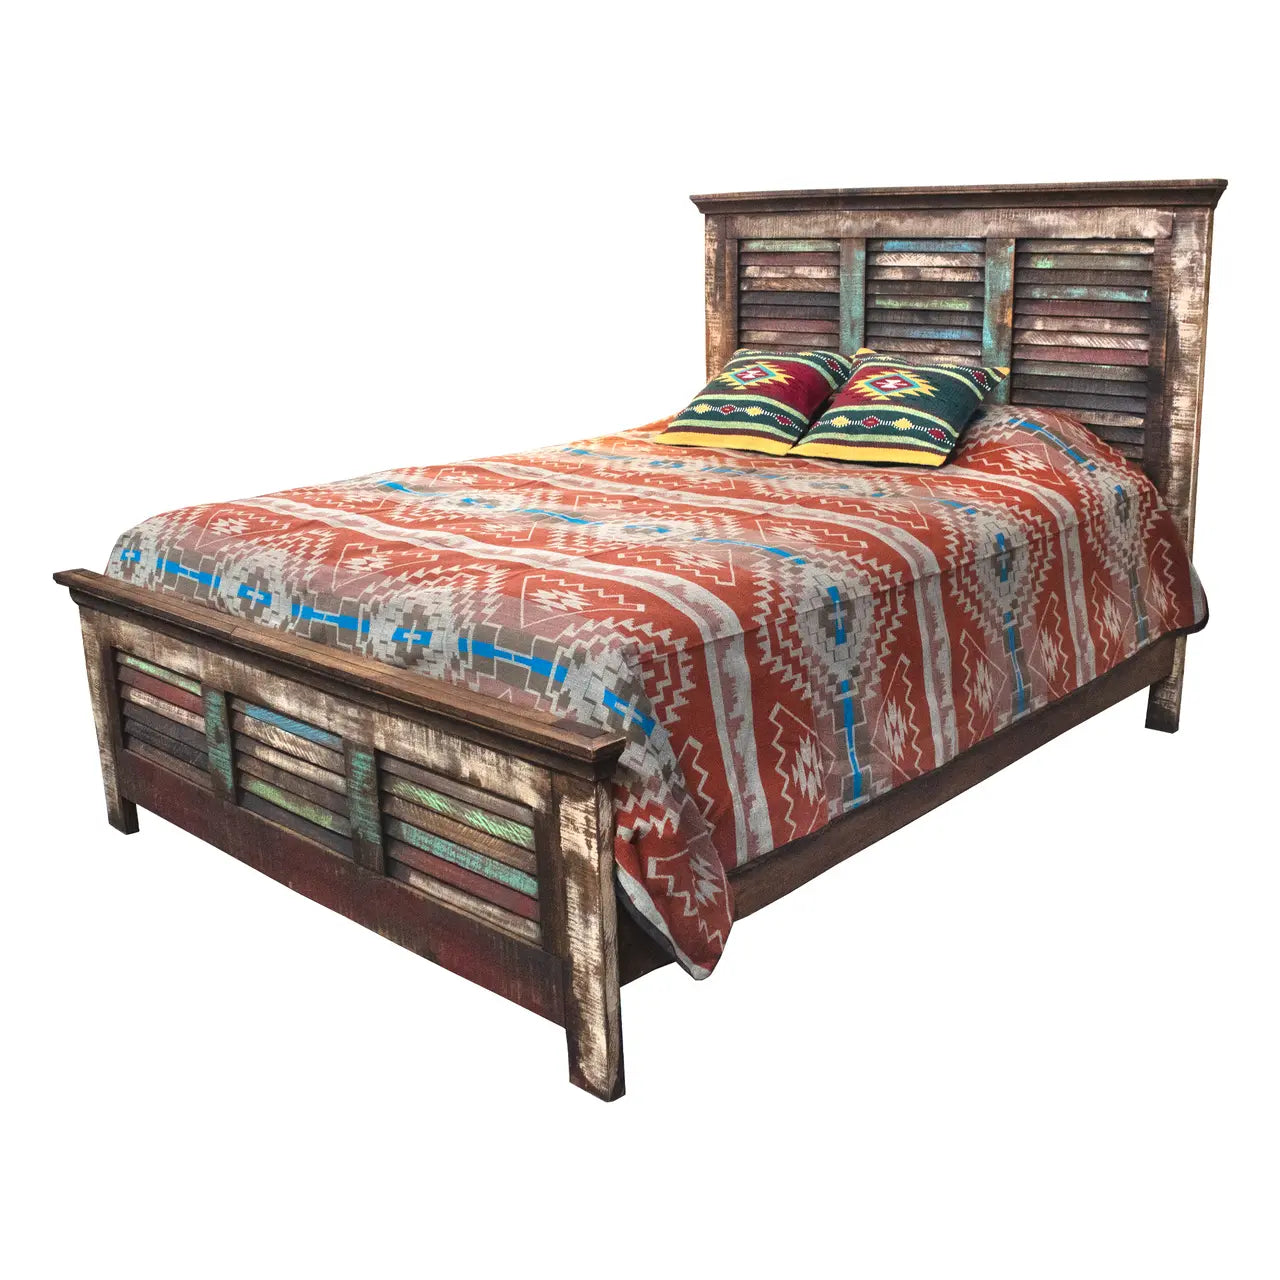 Choosing the Perfect Rustic Bed Frame for Your Southwestern Home